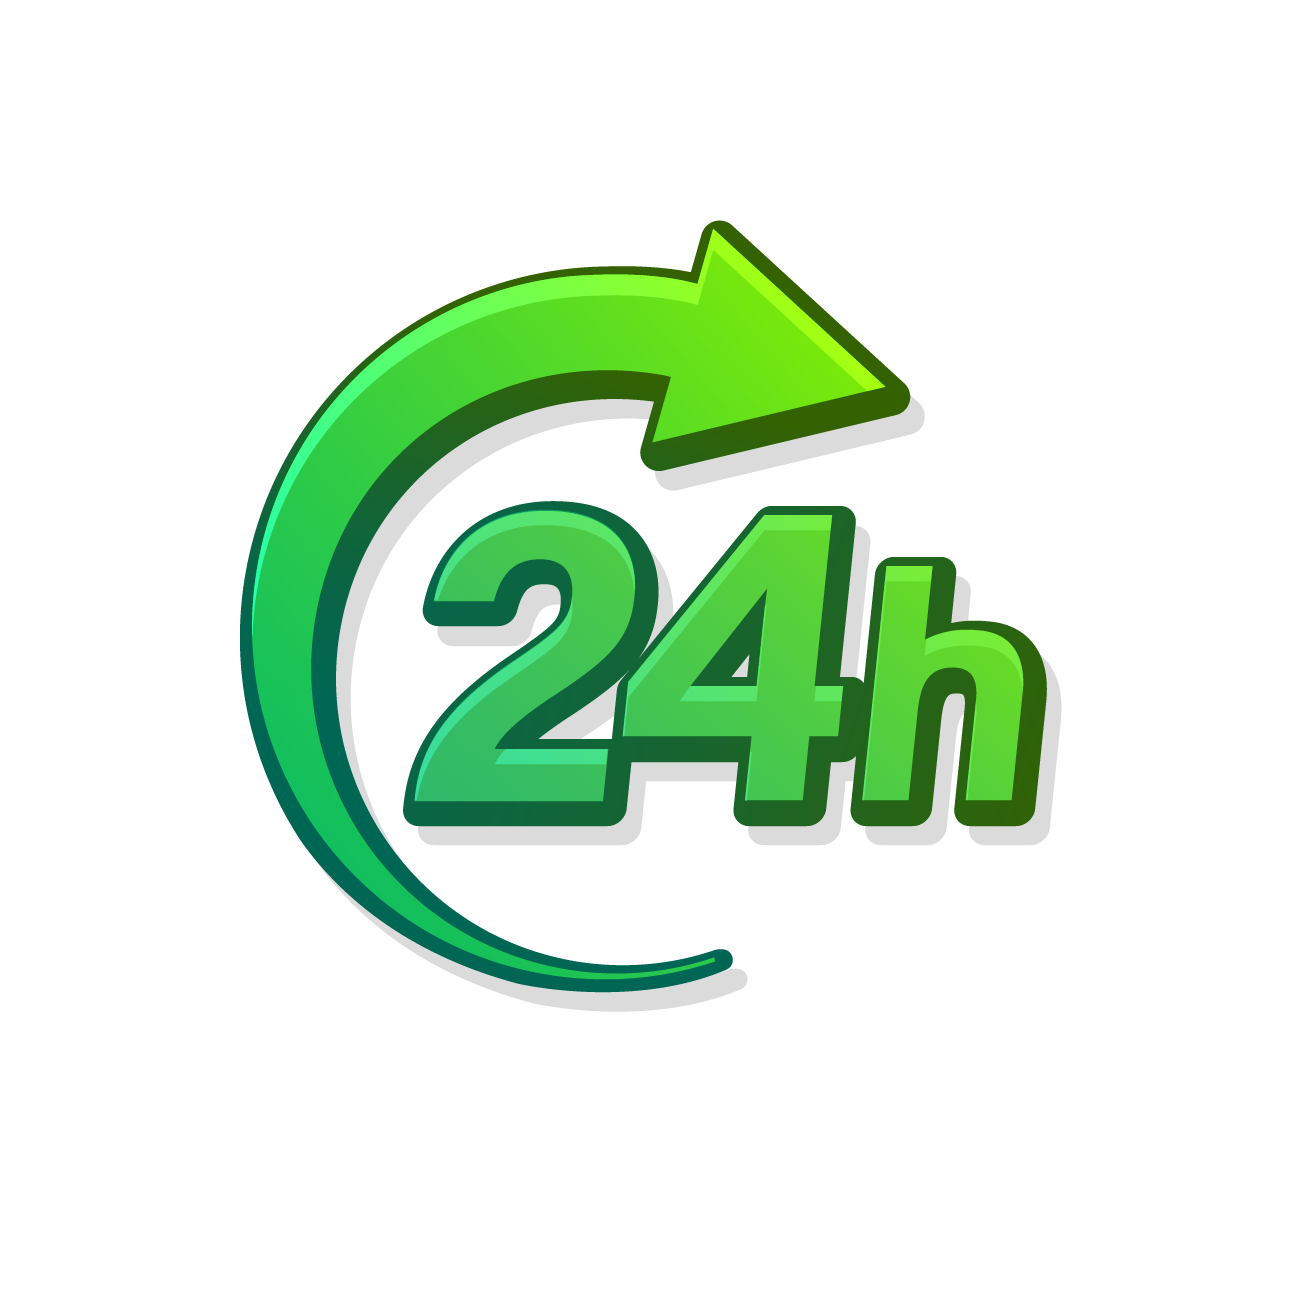 —Pngtree—open 24 hours green icon_6398036